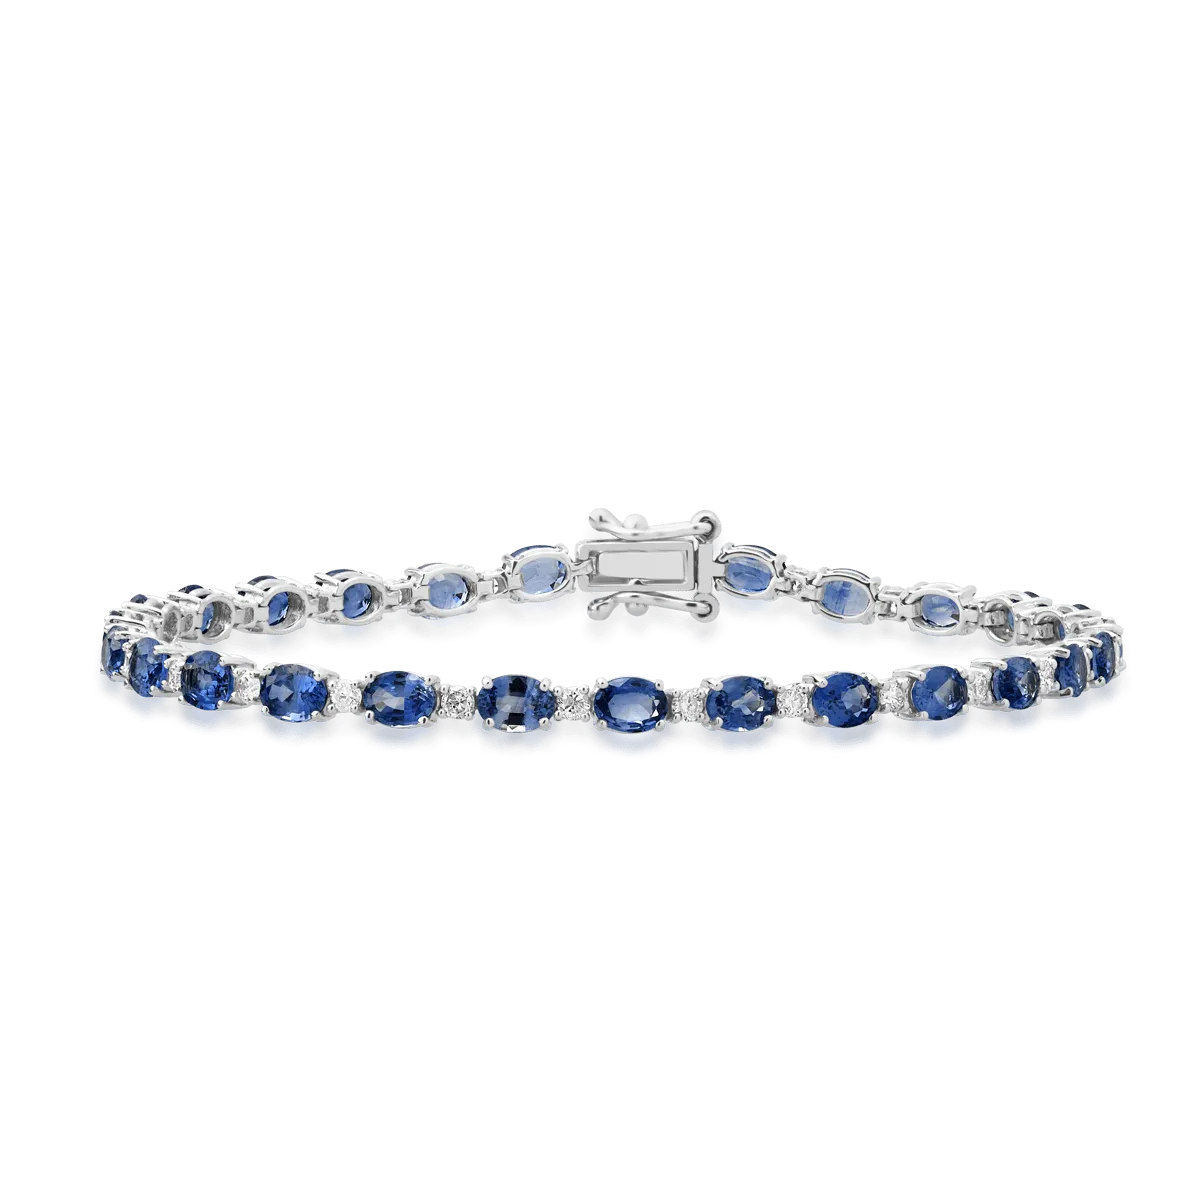 18K white gold tennis bracelet with 7.33ct light blue sapphires and 0.73ct diamonds